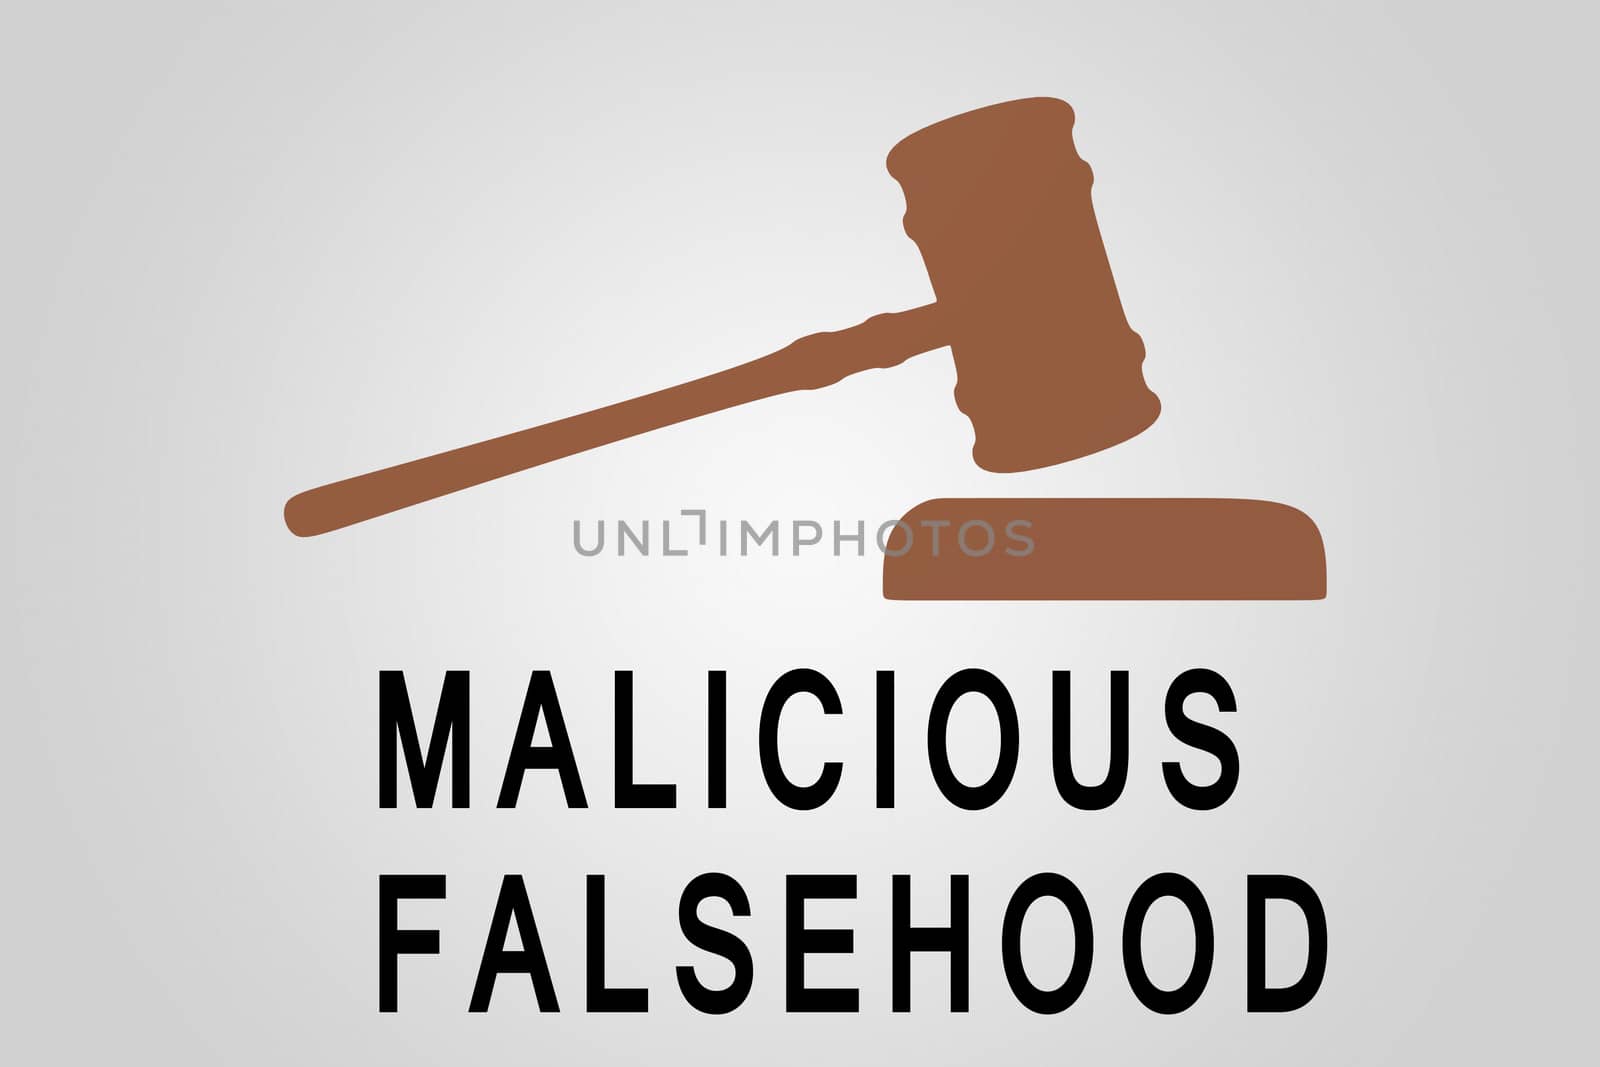 MALICIOUS FALSEHOOD sign concept illustration with judge gavel figures over a gray gradient